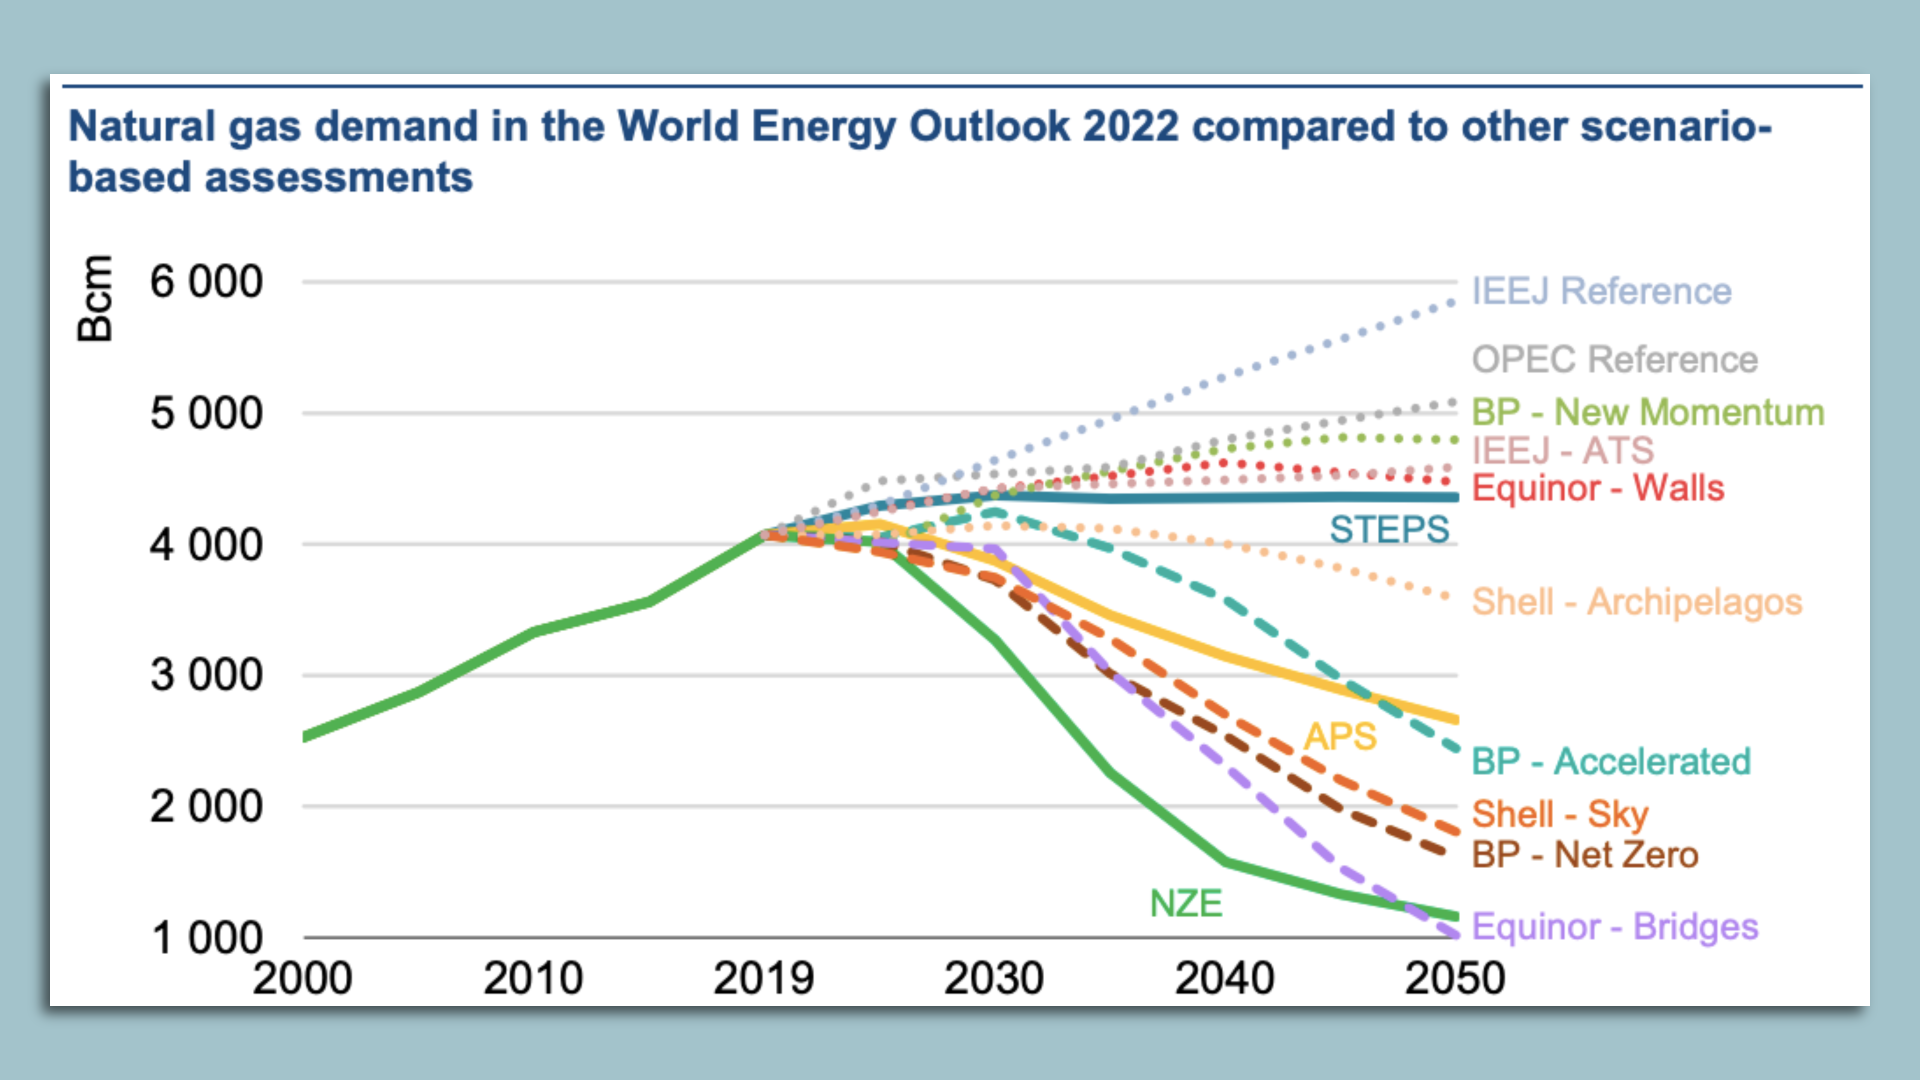 Image from a report on future natural gas demand